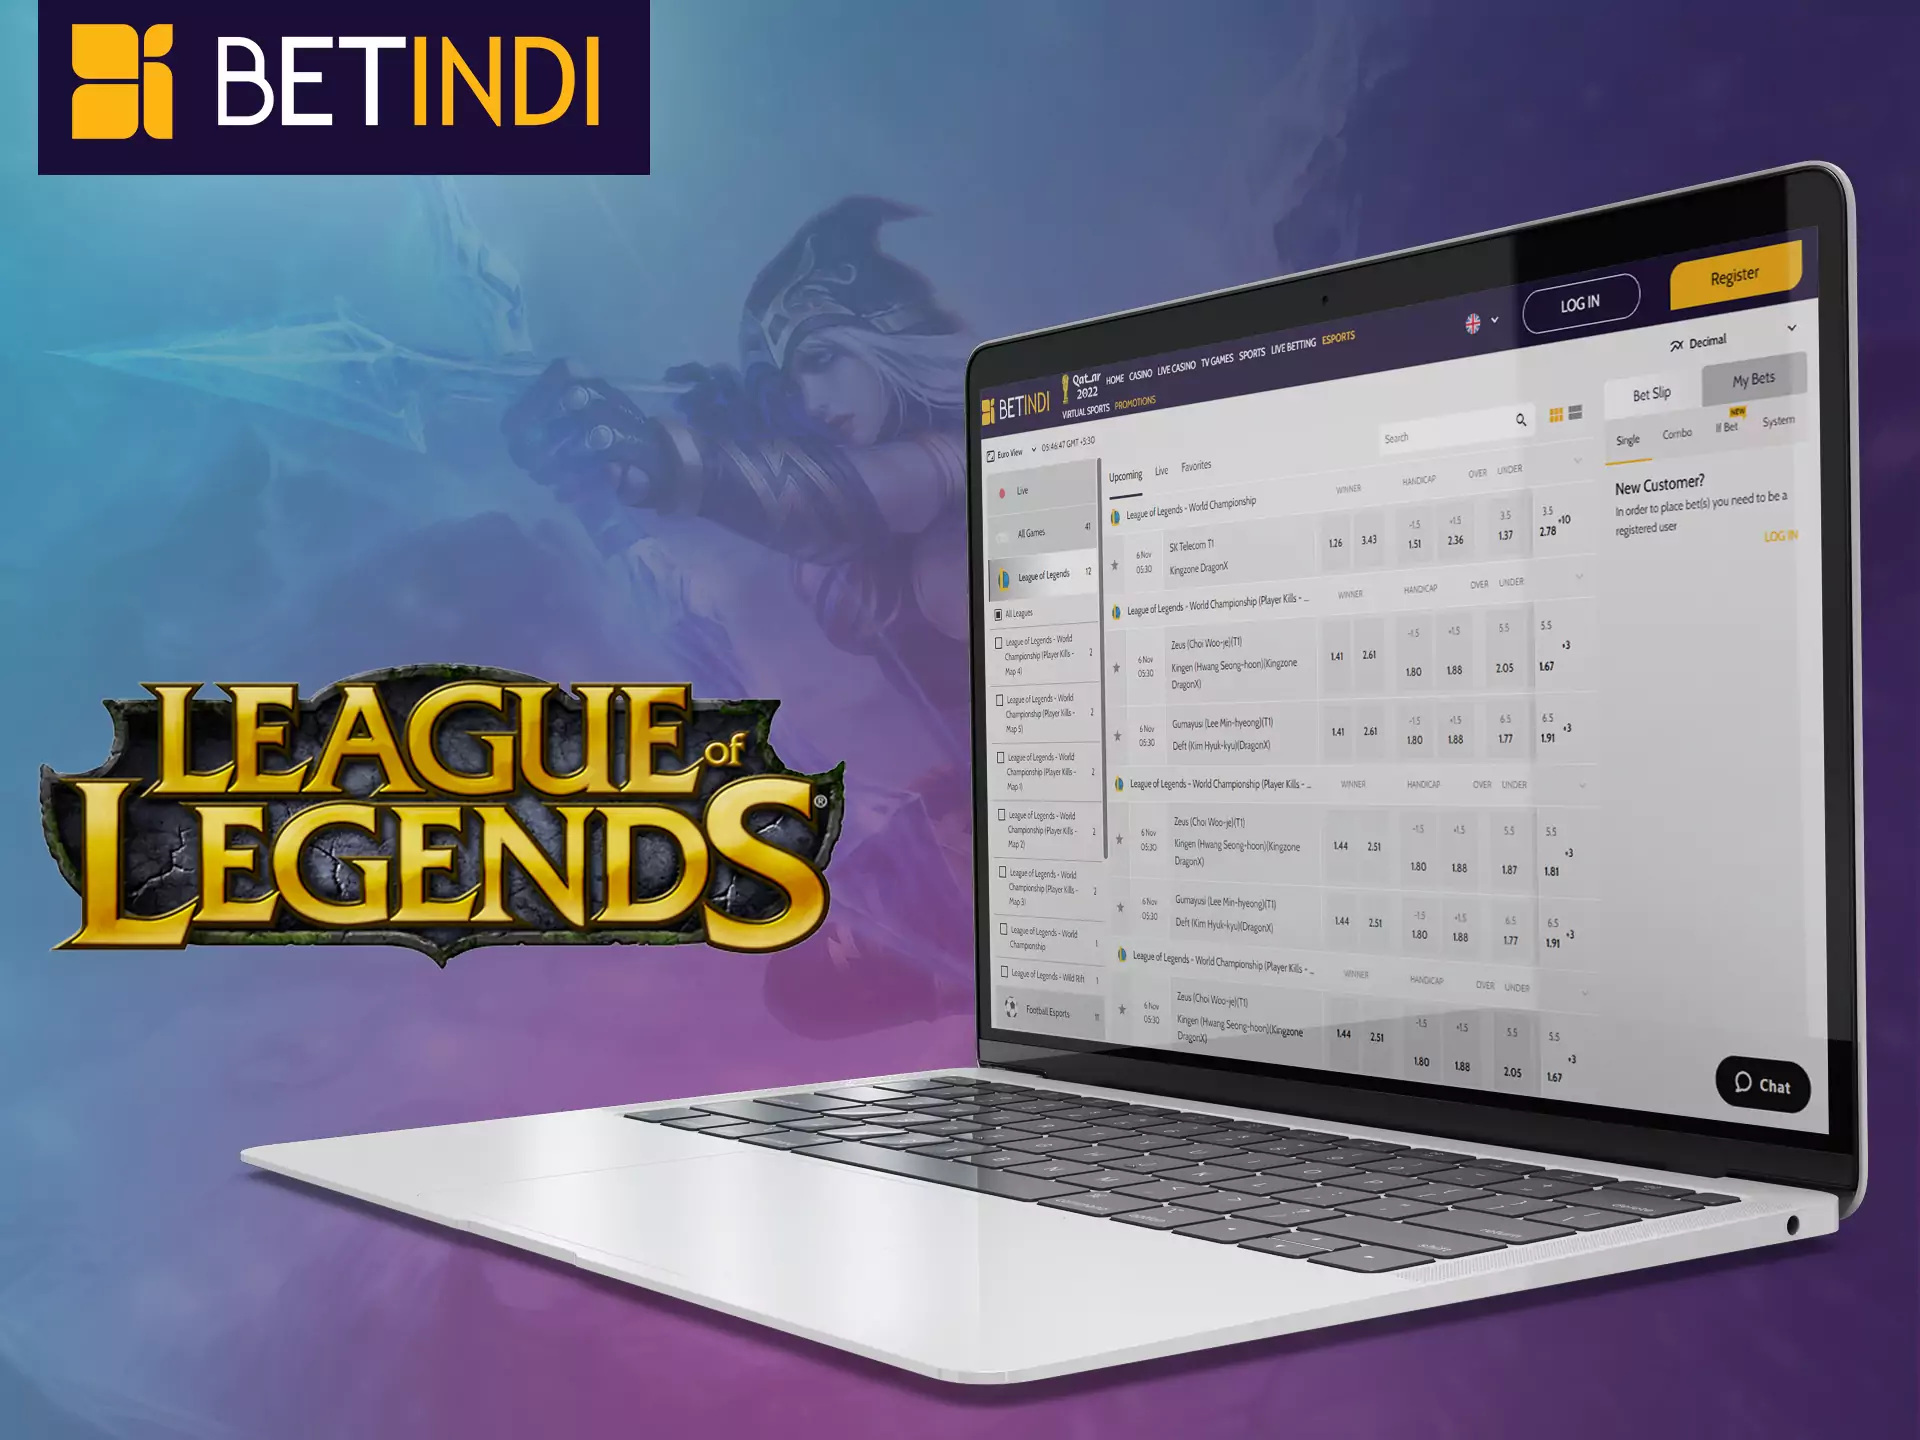 Place bets on the League of Legends on Betindi, support your favorite players.